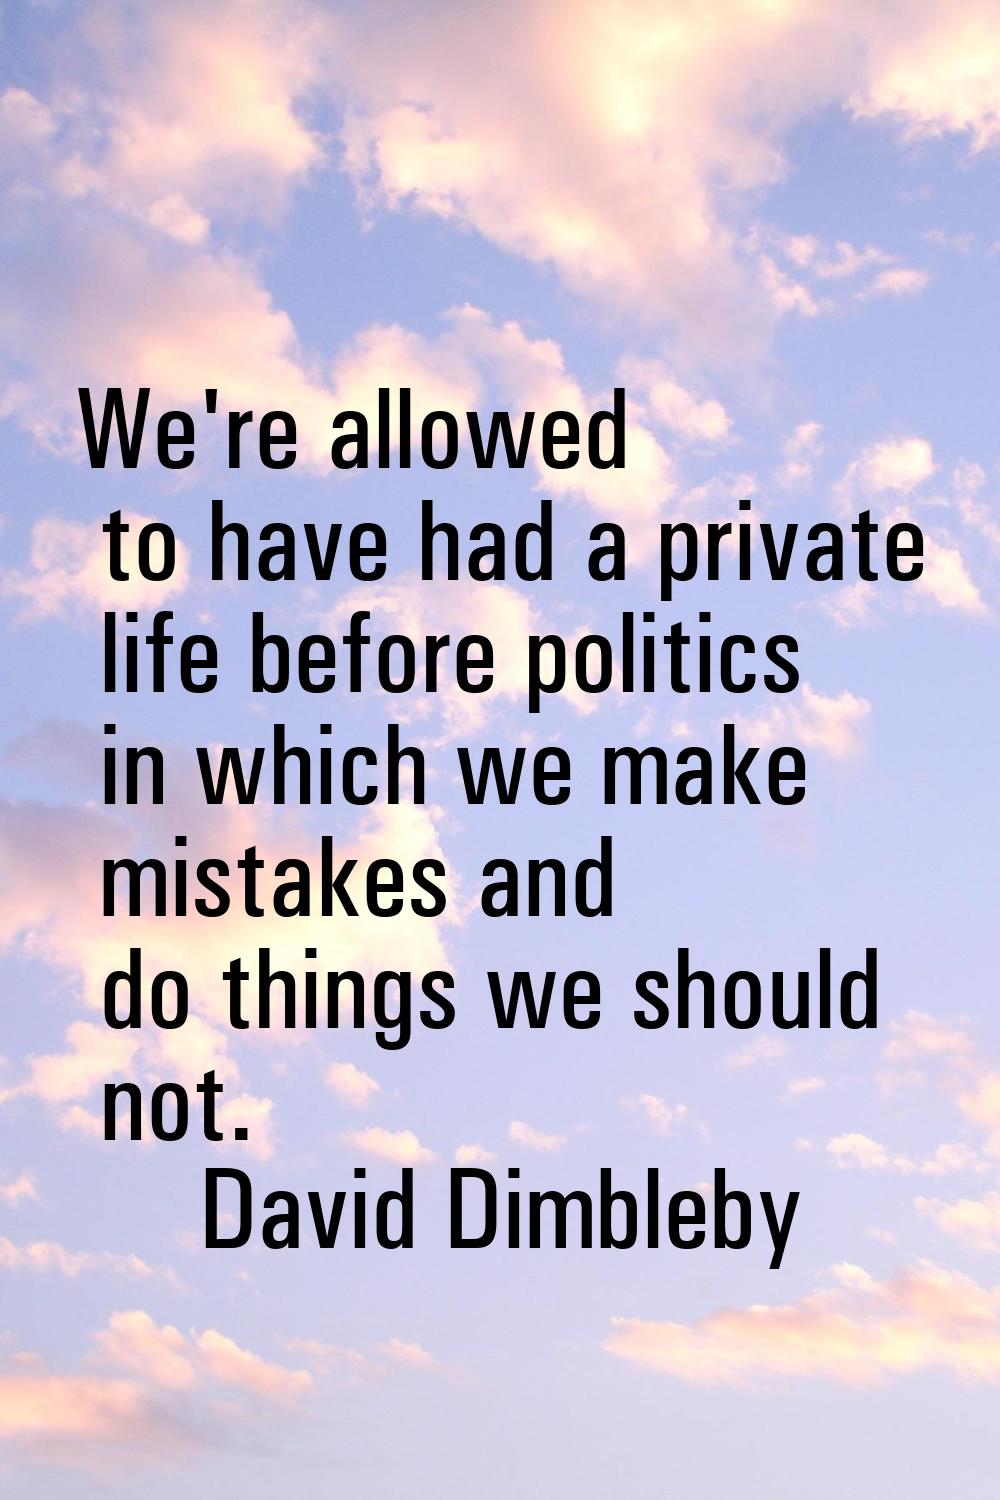 We're allowed to have had a private life before politics in which we make mistakes and do things we